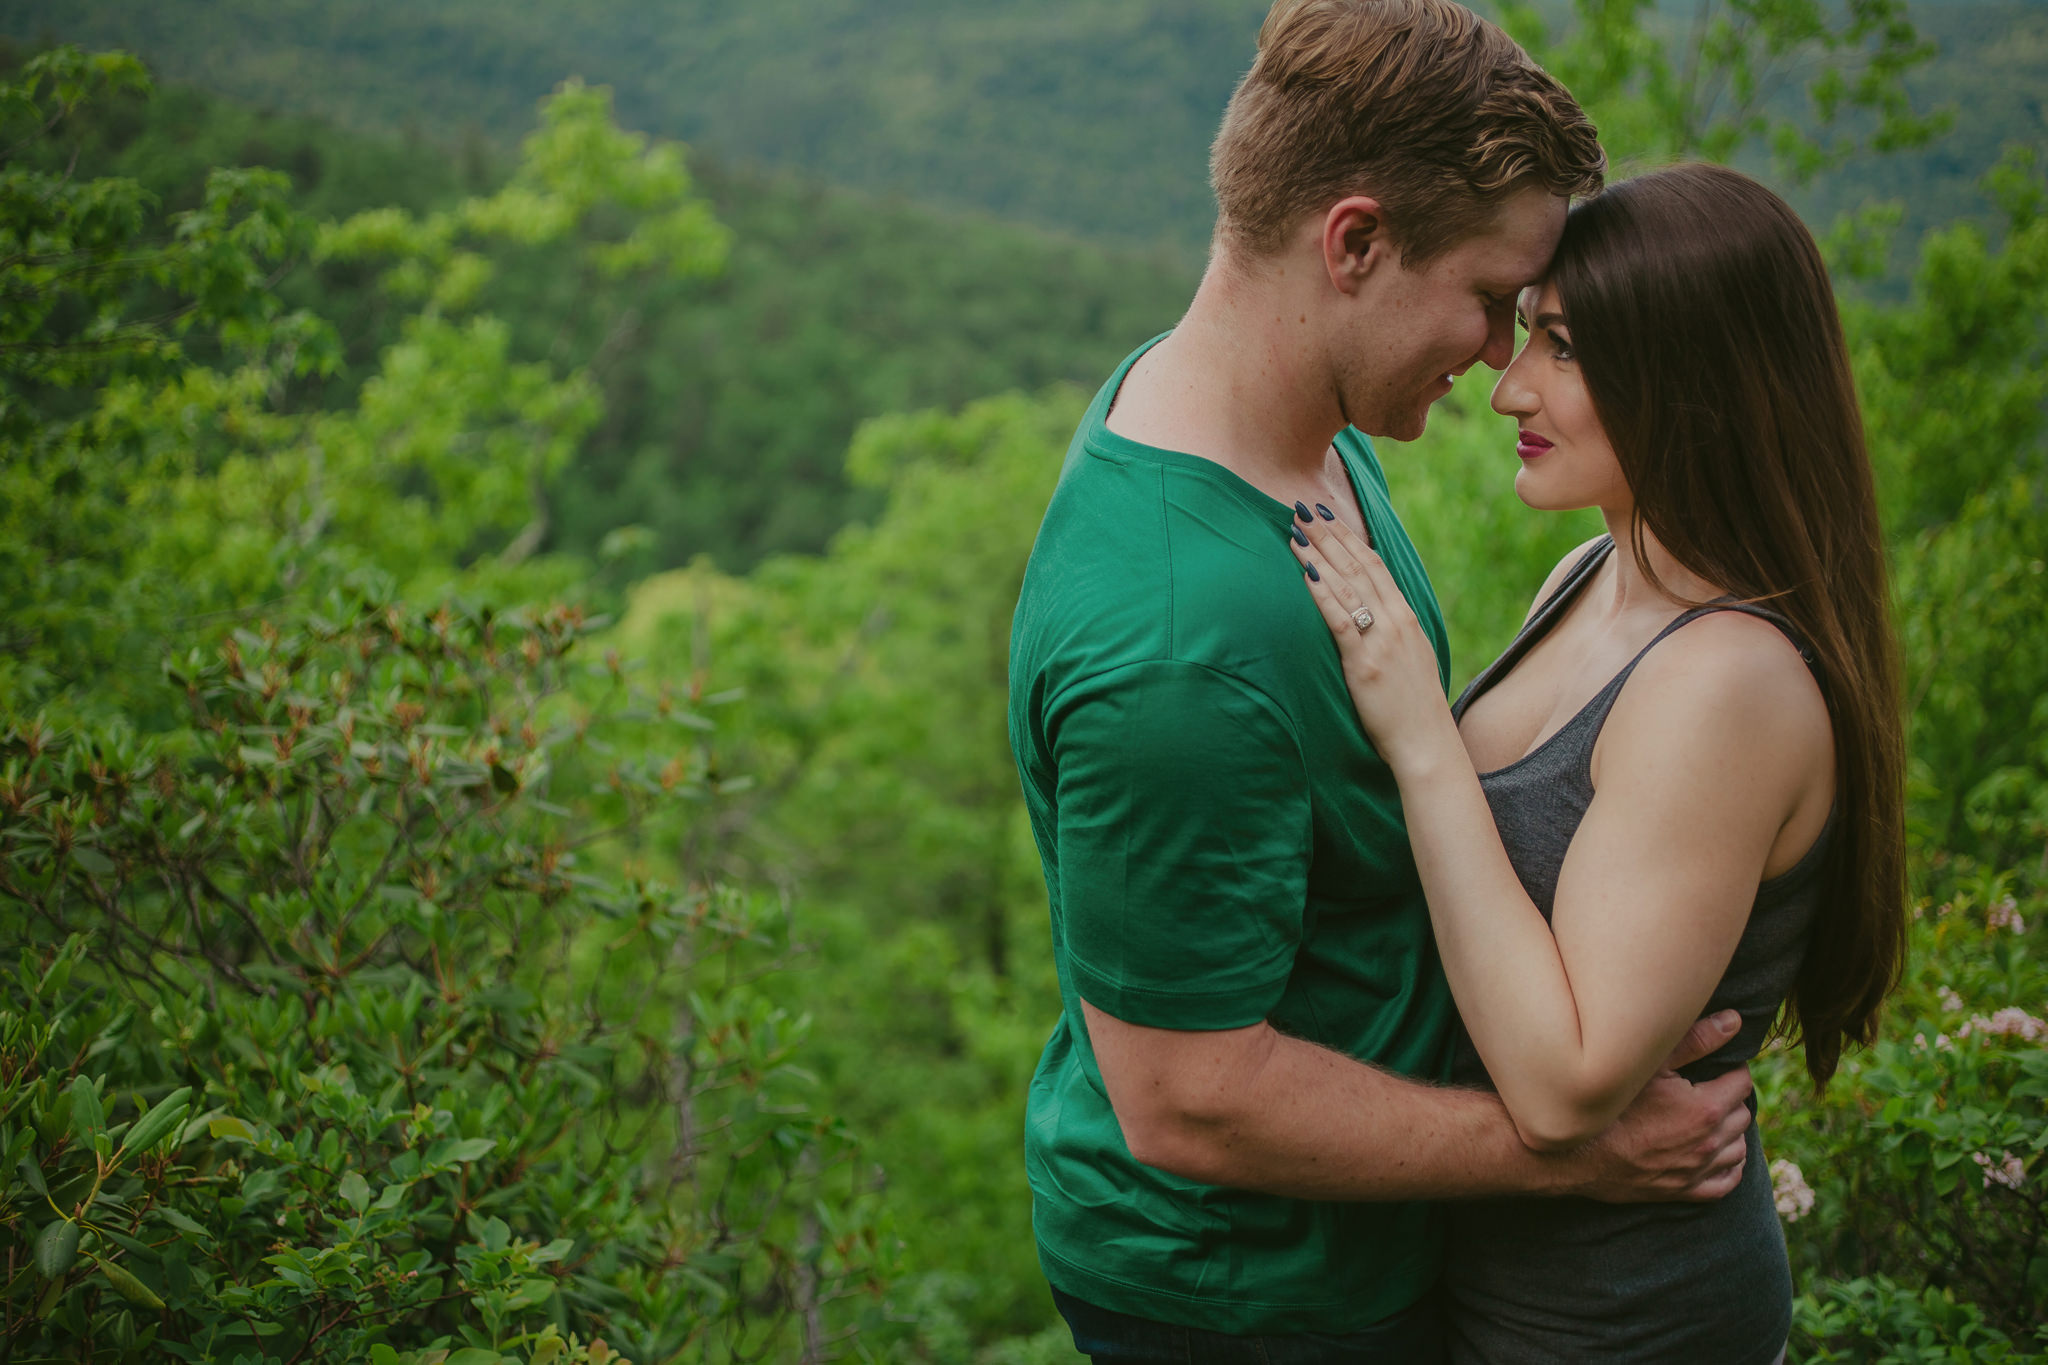 Hawksbill Mountain Trail is a lovely spot for an anniversary photo shoot with Mabyn Ludke Photography